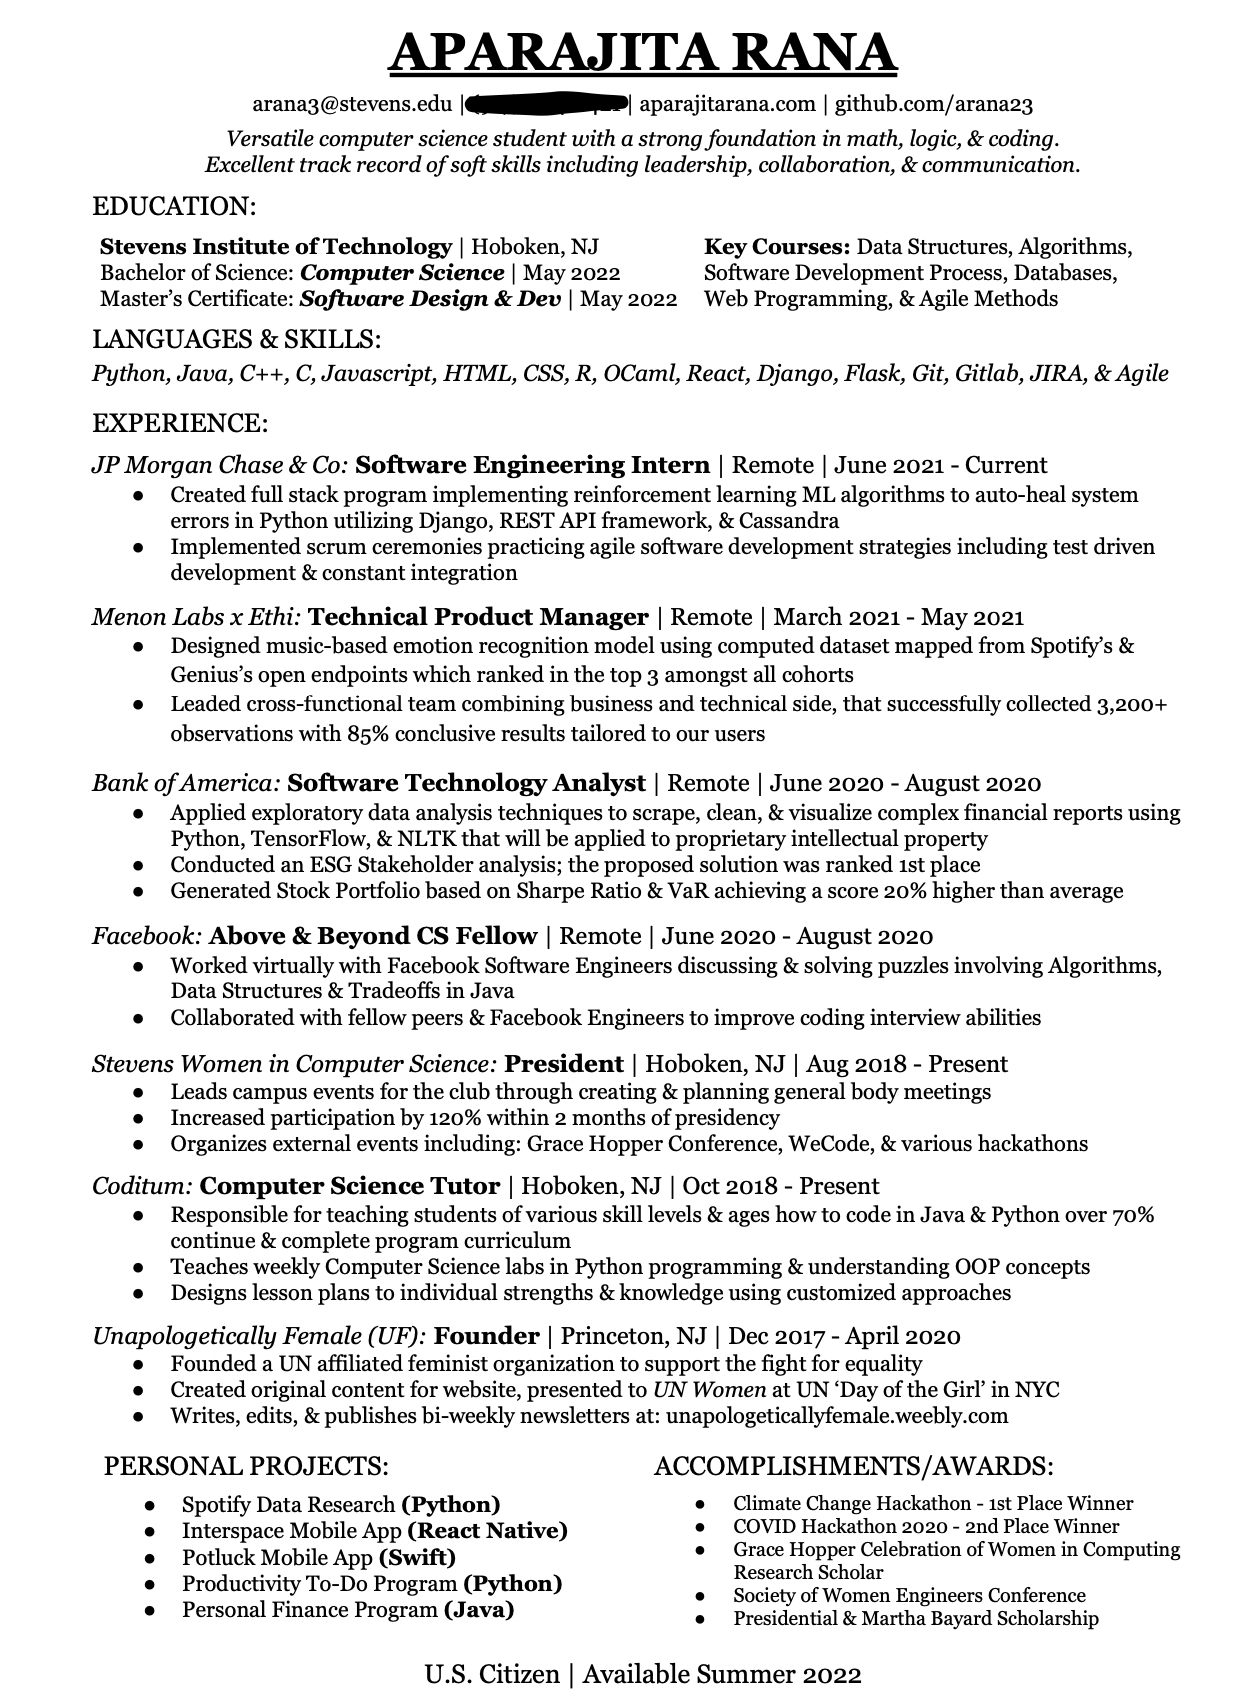 The resume that got me interviews with all of FAANG (New Grad SWE